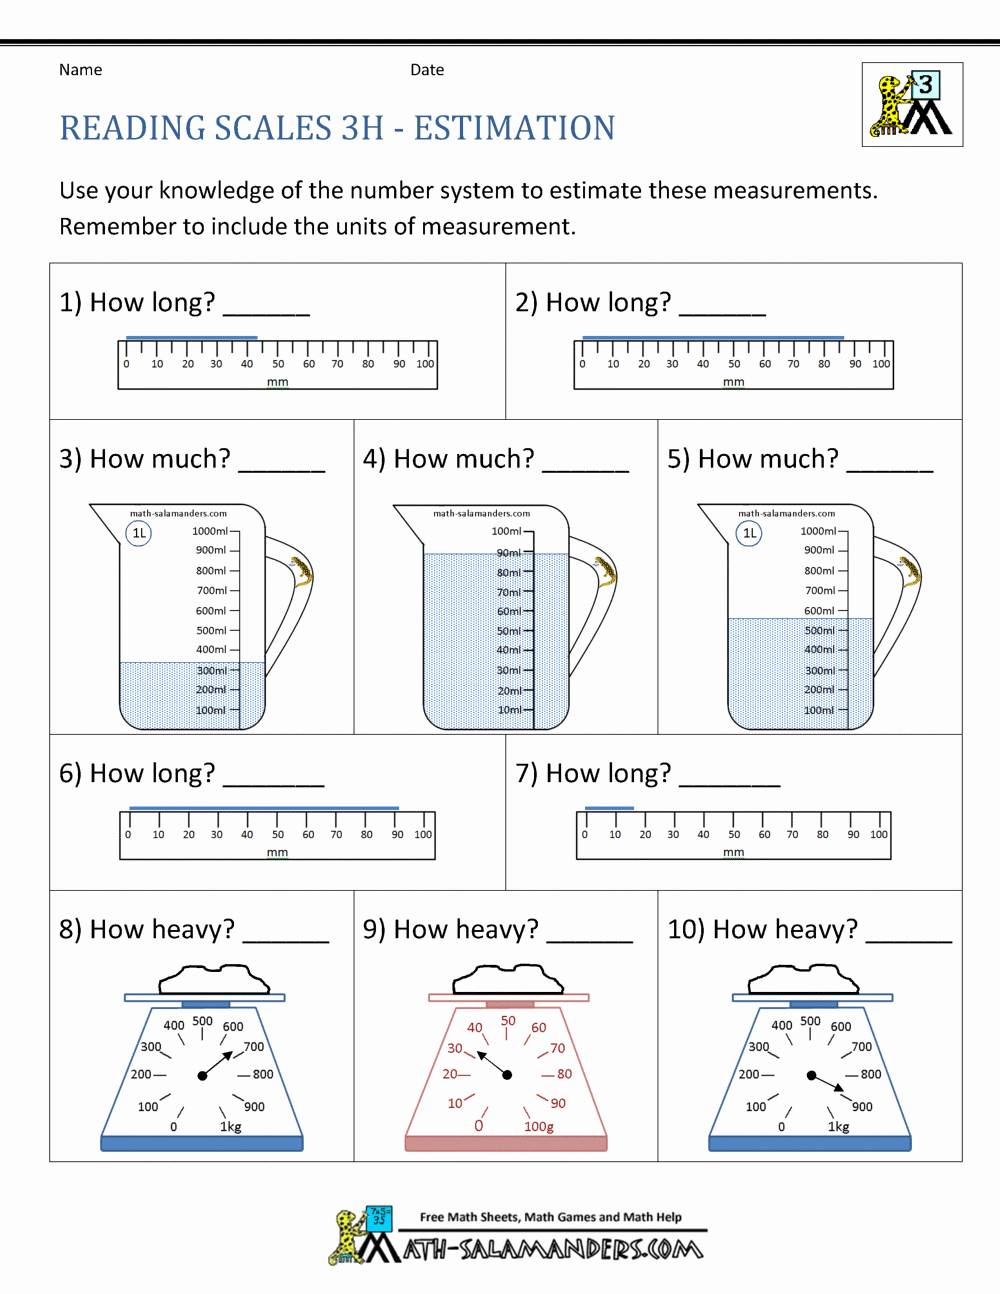 Estimation Worksheets for 3rd Grade Best Of Practice Sheets for 3rd Graders Search Results Education